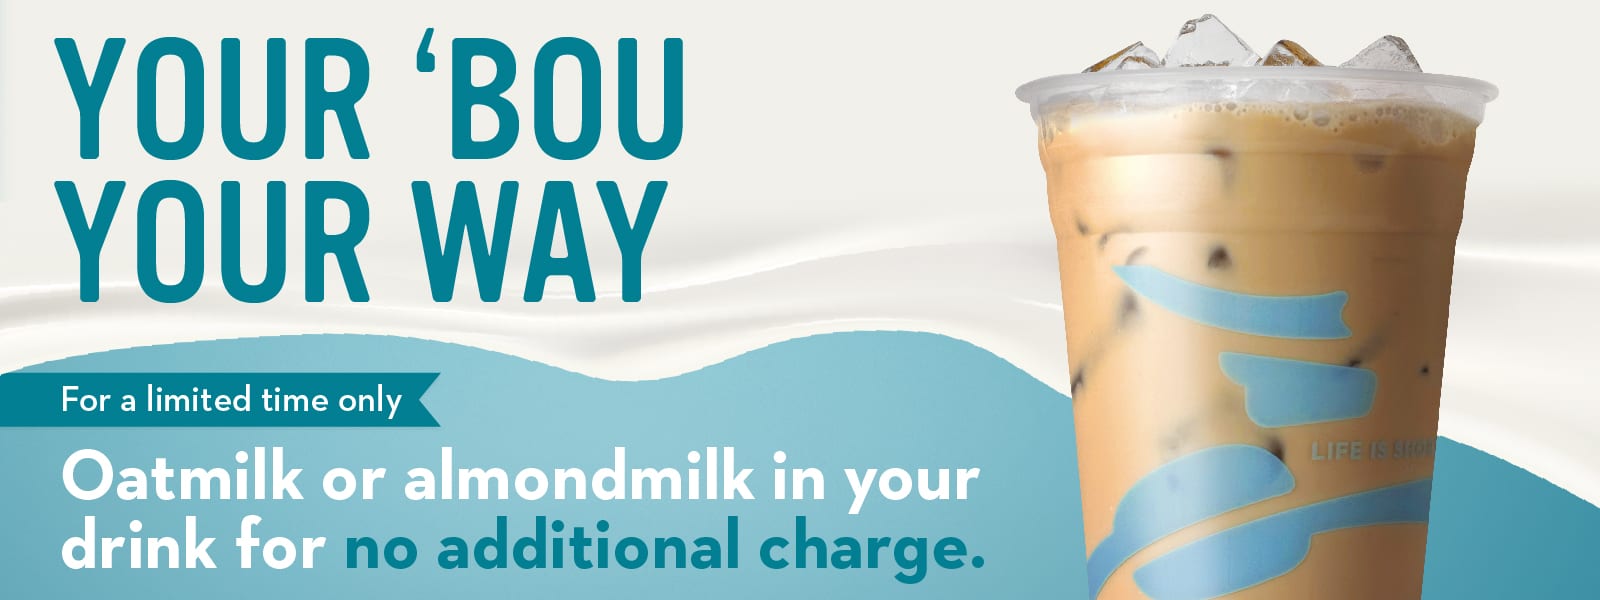 Your 'Bou, Your Way. For a limited time only, enjoy non-dairy for no additional charge.